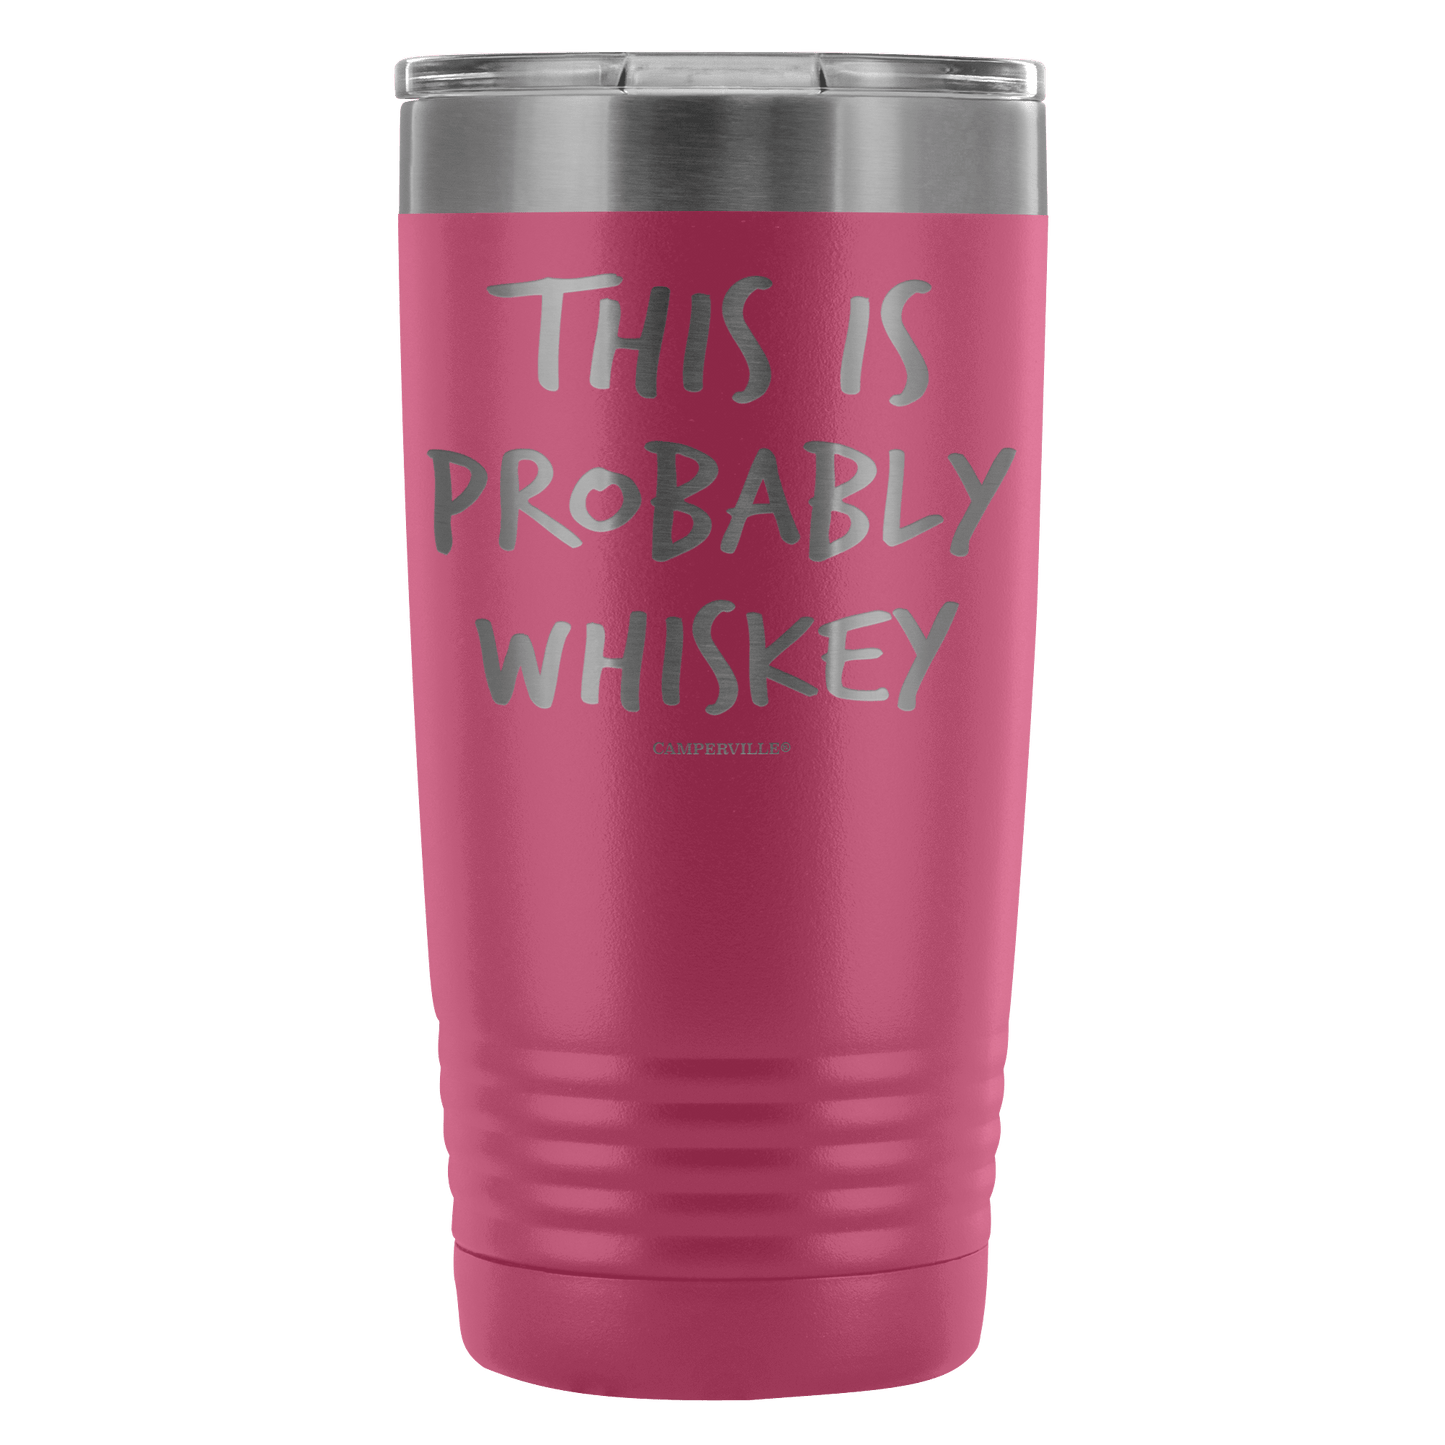 Funny "This Is Probably Whiskey" 20oz Stainless Steel Tumbler